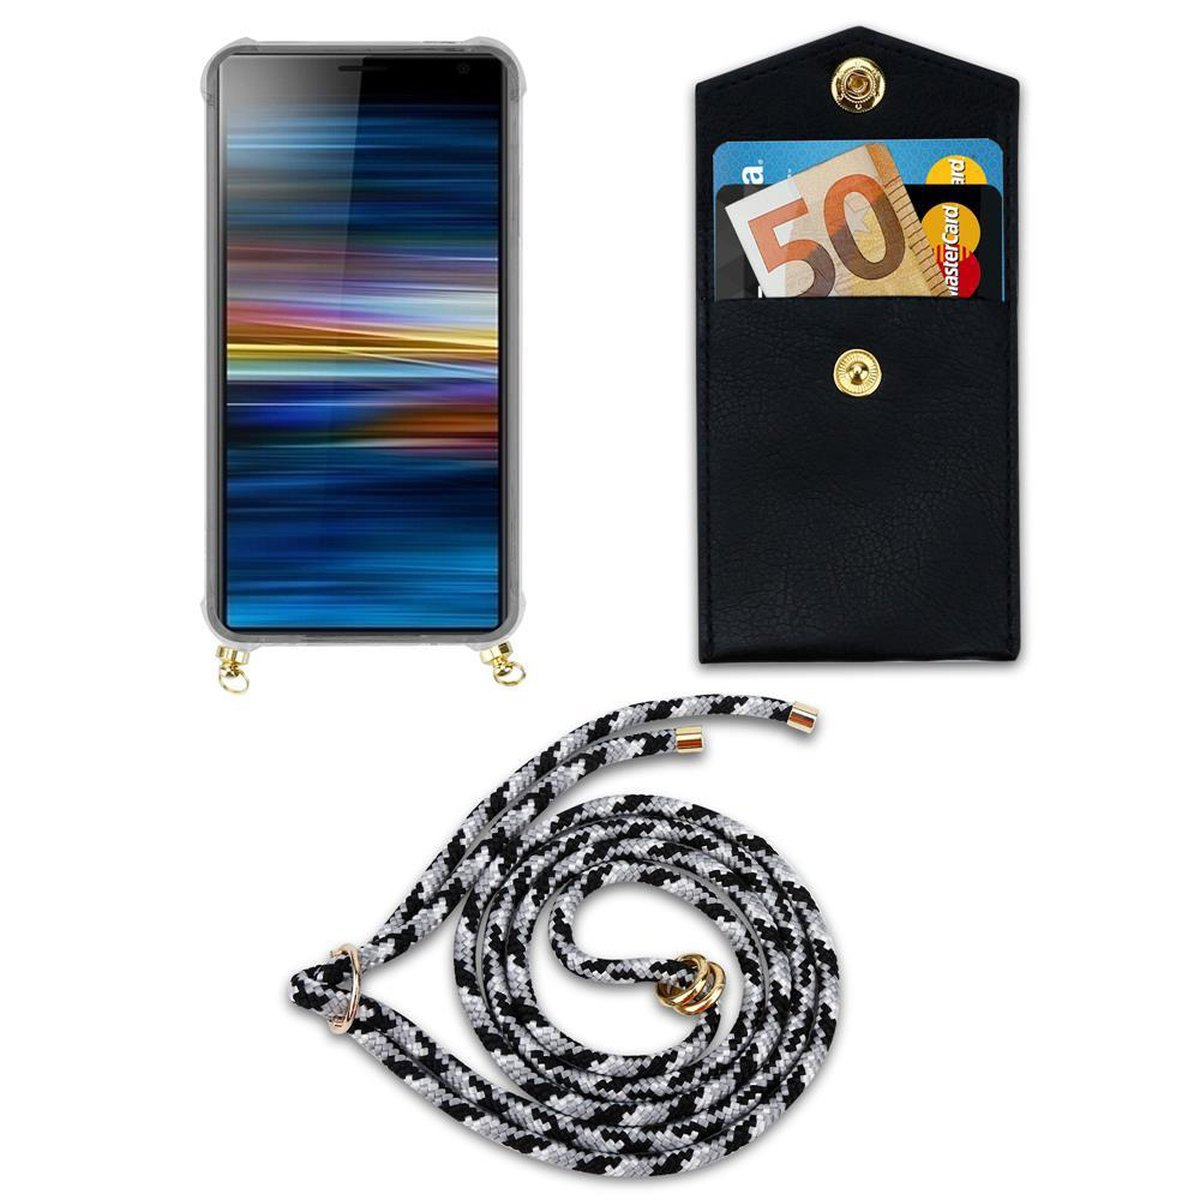 PLUS, Kette Gold SCHWARZ Backcover, abnehmbarer Kordel Ringen, Xperia 10 CAMOUFLAGE und Band Hülle, Handy Sony, CADORABO mit